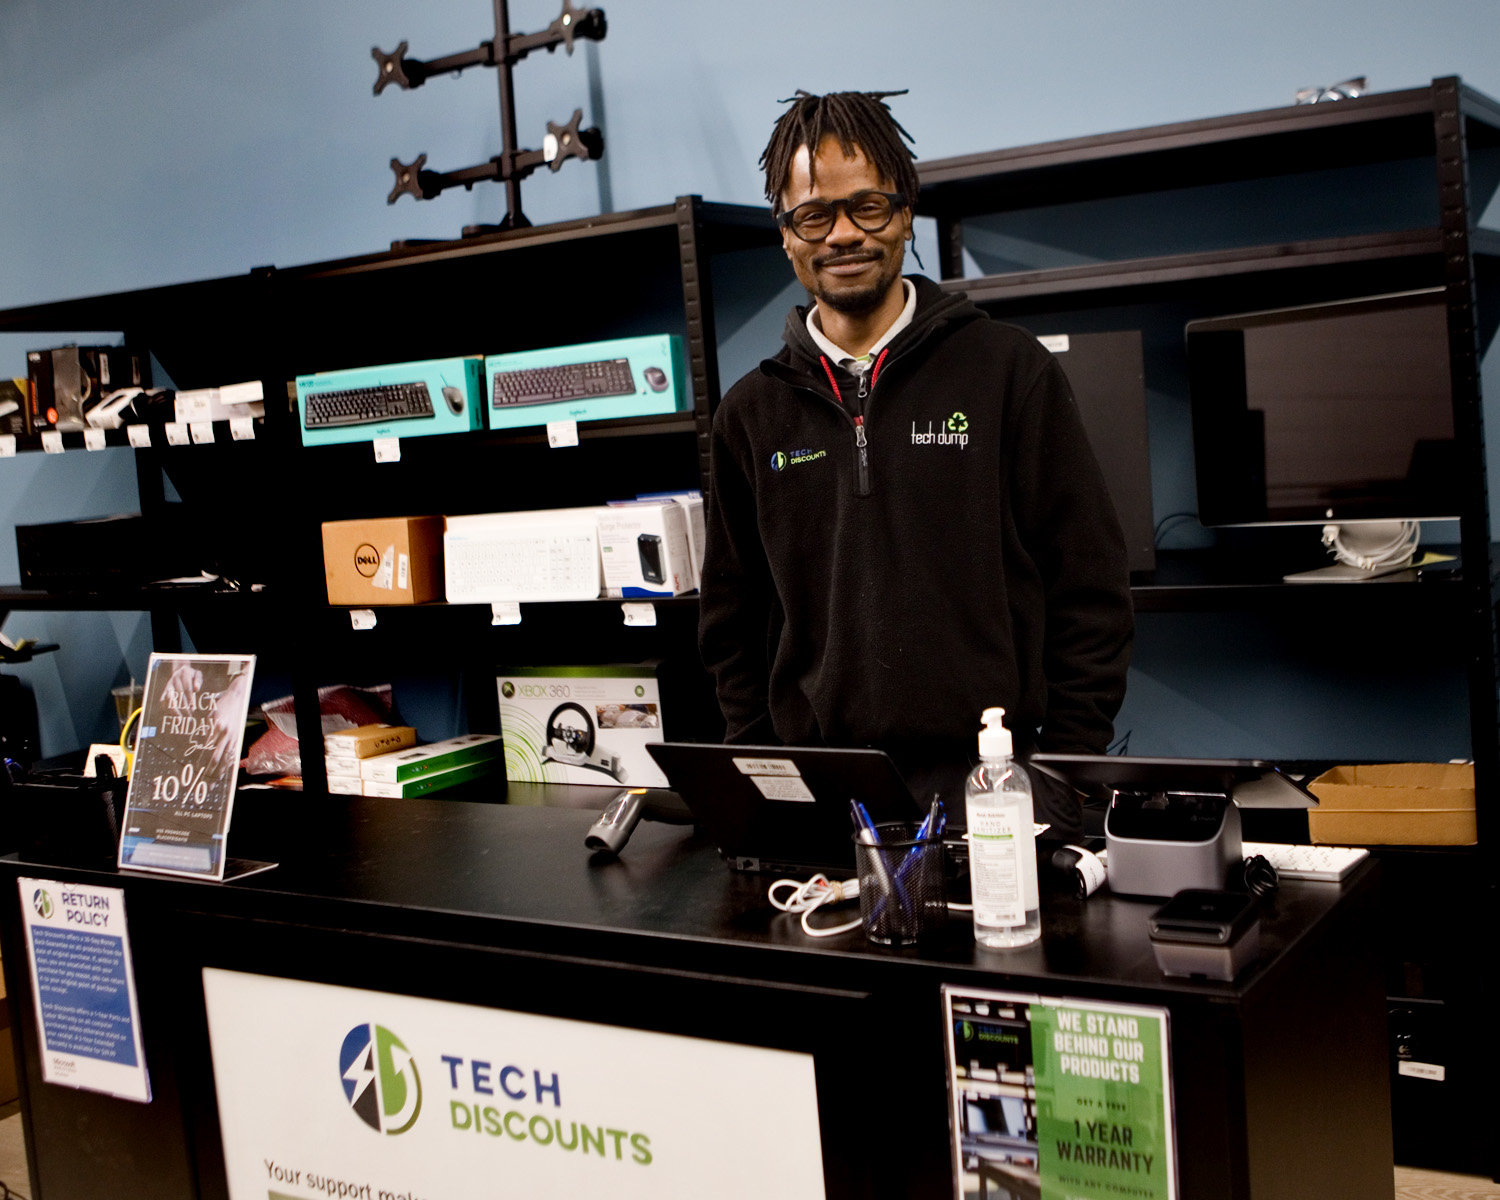 Both retail stores carry three main brands of computers: Dell, Hewlett-Packard, and Lenovo. Large quantities of computers are sold to schools and non-profits, but community members are welcome to shop too. Wil James is the store manager of the St. Paul store.